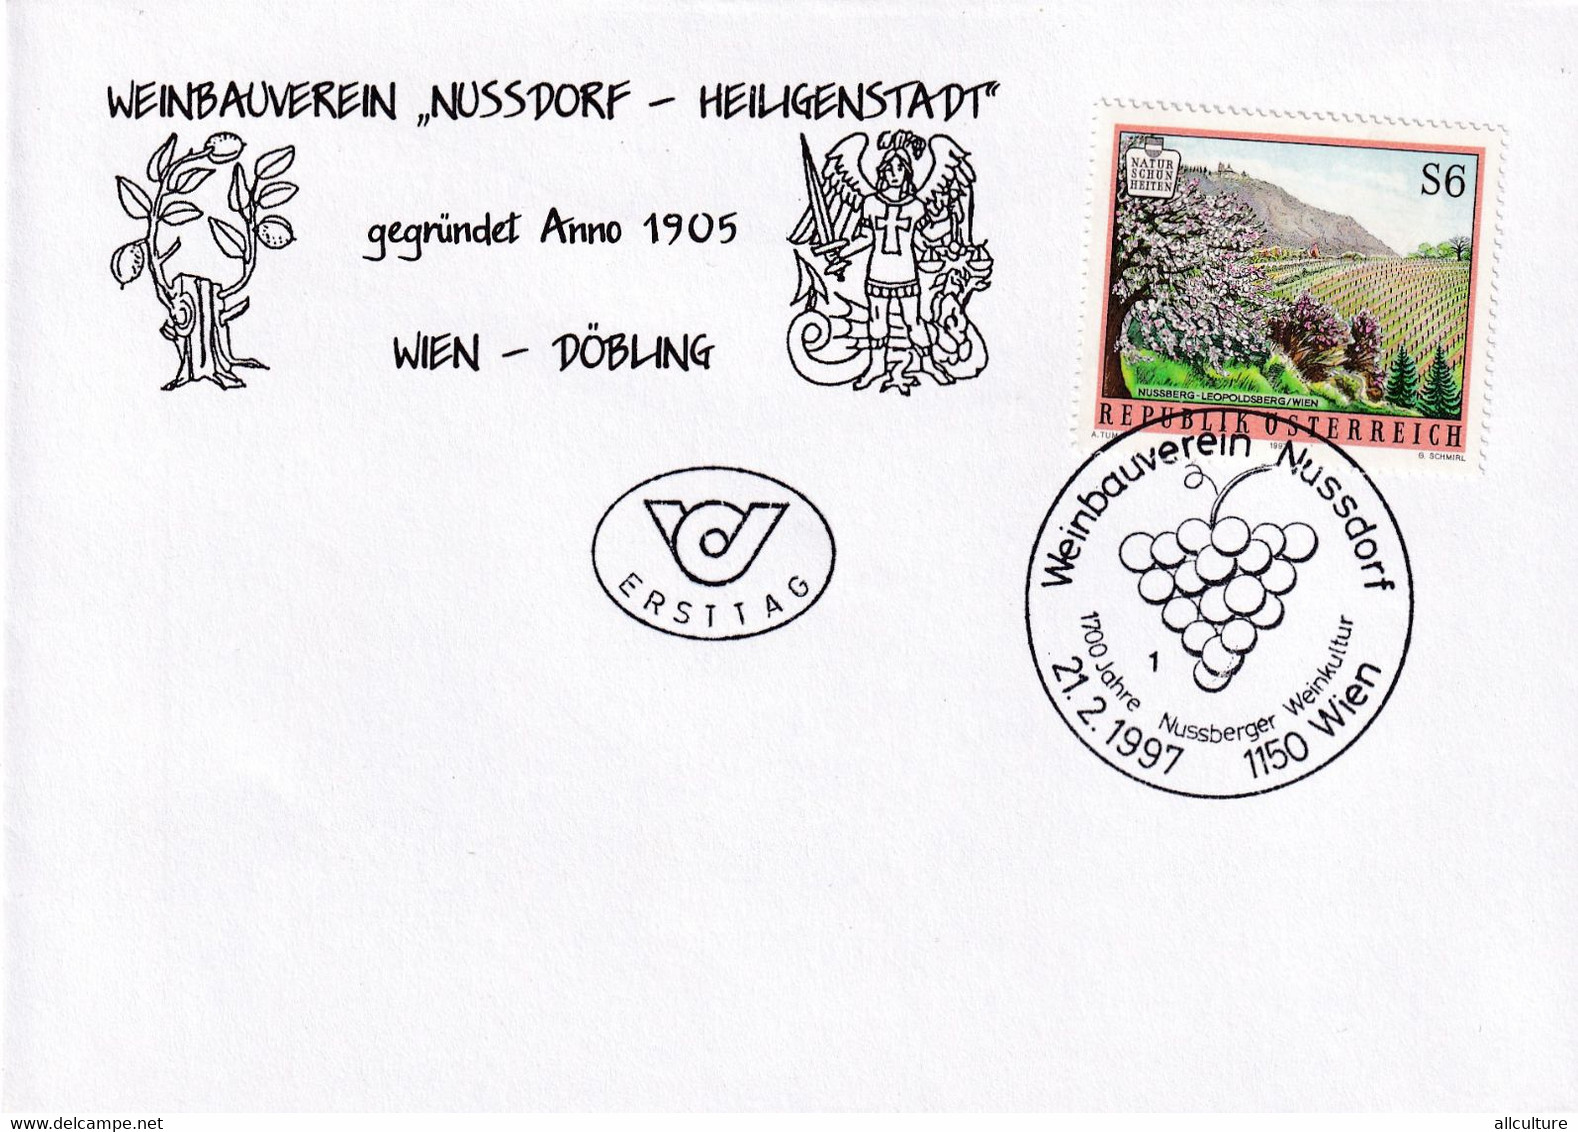 A8405 - ERSTTAG,WEINBAUVEREIN NUSSDORF FOUNDED IN 1905, REPUBLIK OESTERREICH AUSTRIA WIEN 1997 USED STAMP ON COVER - Covers & Documents